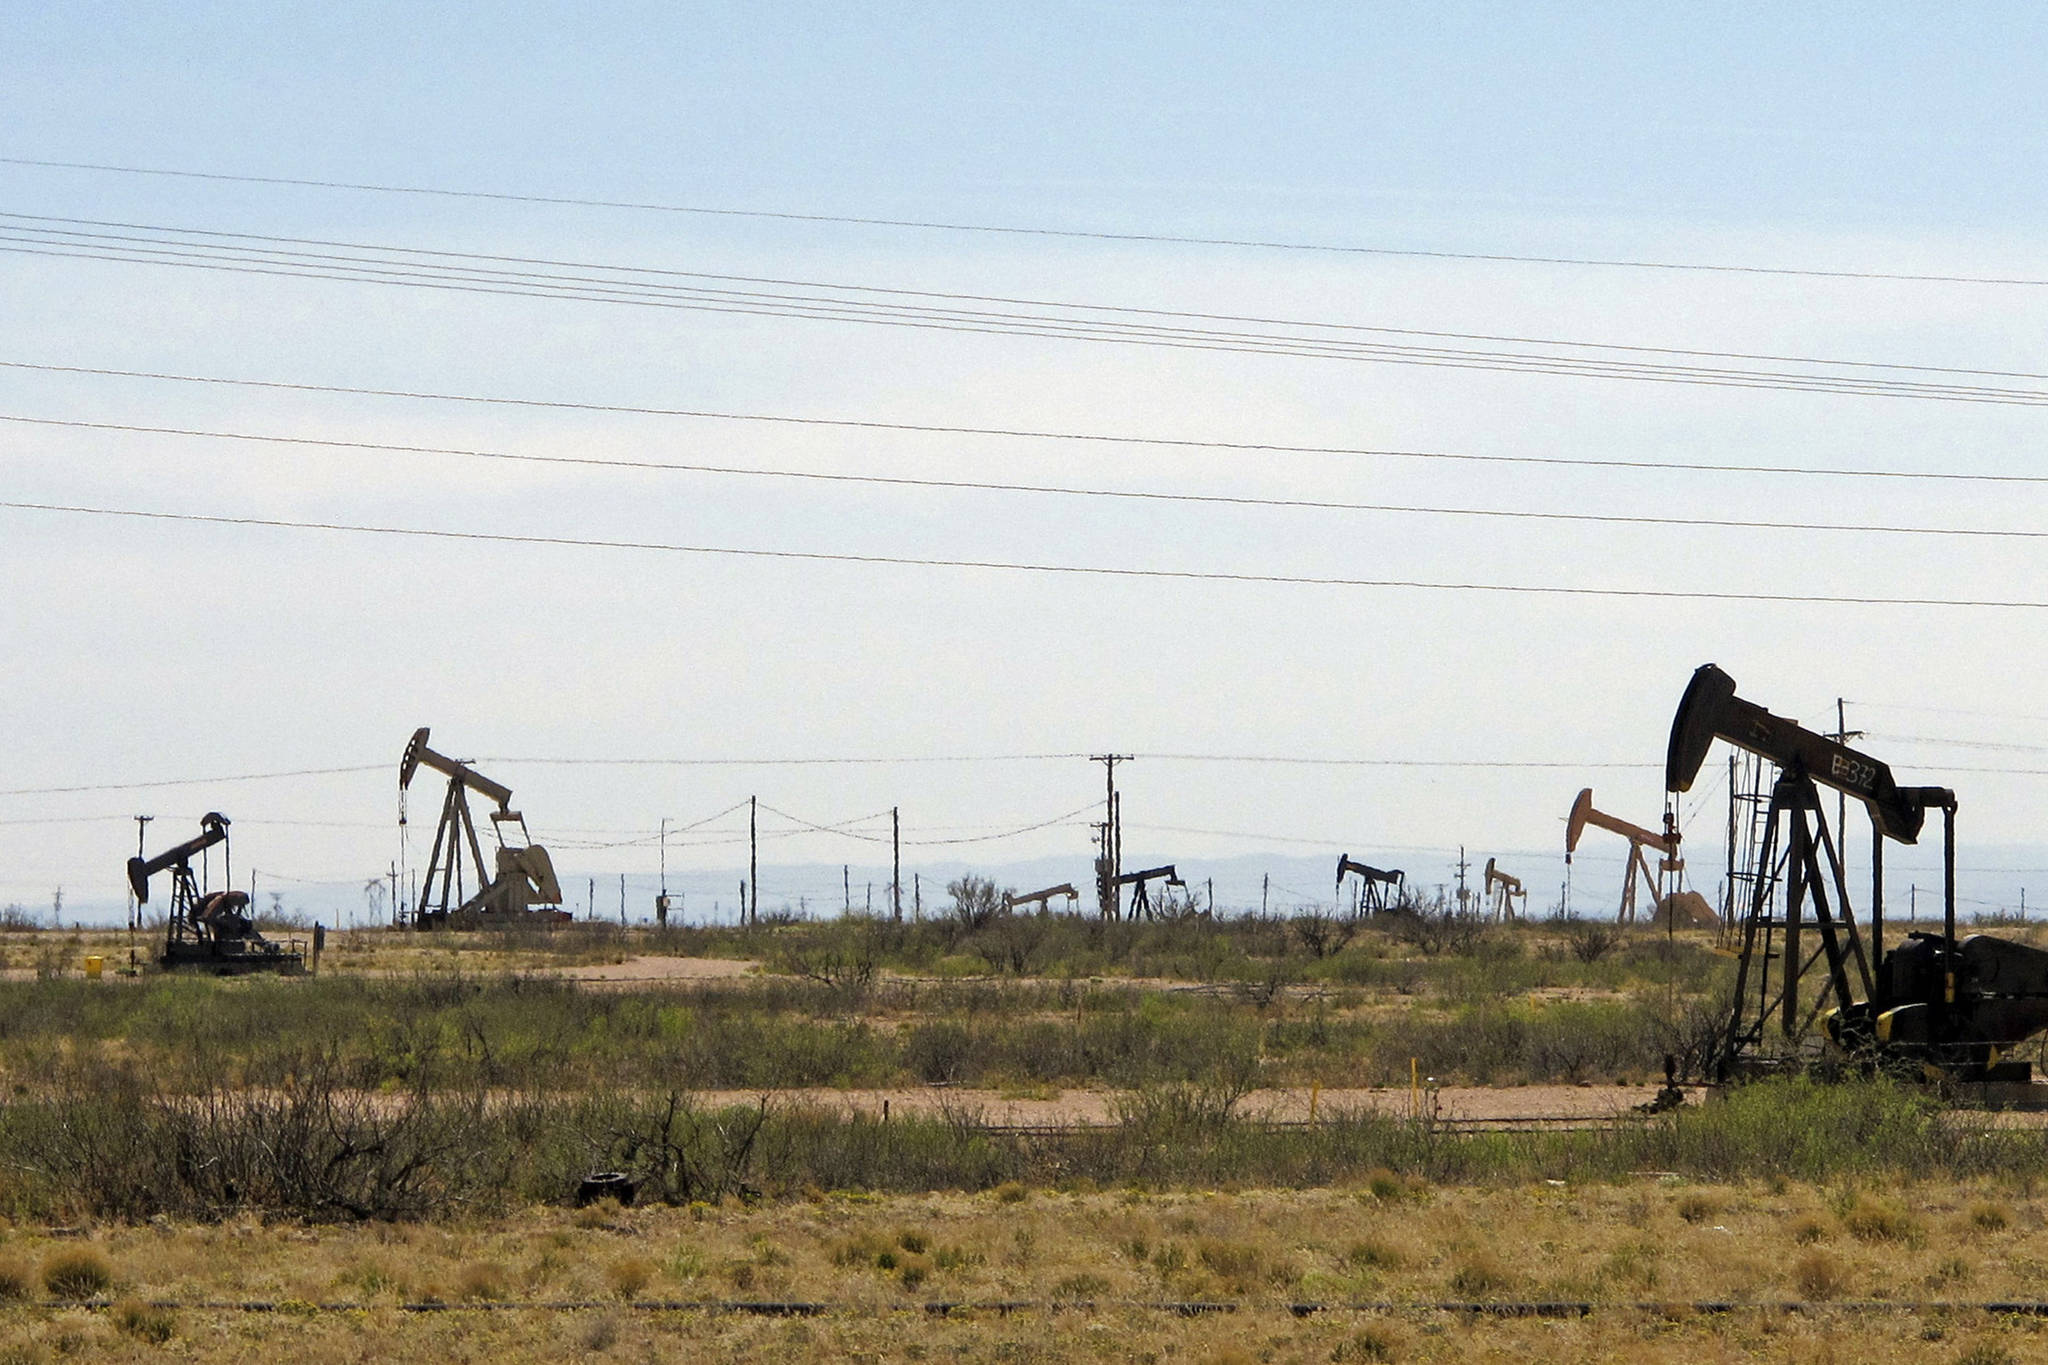 n this April 9, 2014, photo, oil rigs stand in the Loco Hills field on U.S. Highway 82 in Eddy County near Artesia, N.M., one of the most active regions of the Permian Basin. President Joe Biden is set to announce a wide-ranging moratorium on new oil and gas leasing on U.S. lands, as his administration moves quickly to reverse Trump administration policies on energy and the environment and address climate change.  (AP Photo/Jeri Clausing, File)